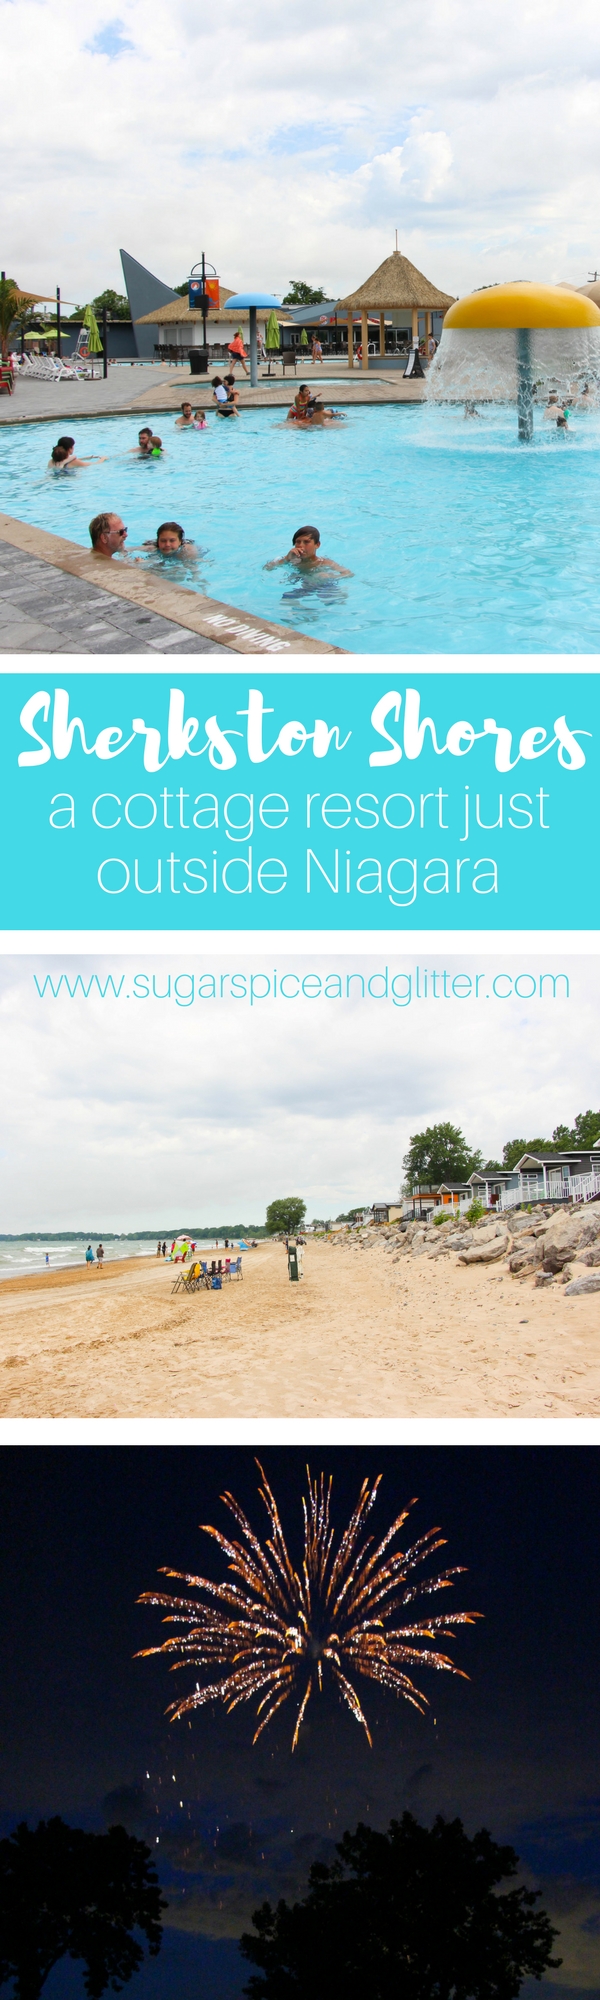 An awesome cottage resort just outside of Niagara Falls, Sherkston Shores is an awesome cottage rental or timeshare property for a vacation that has it all